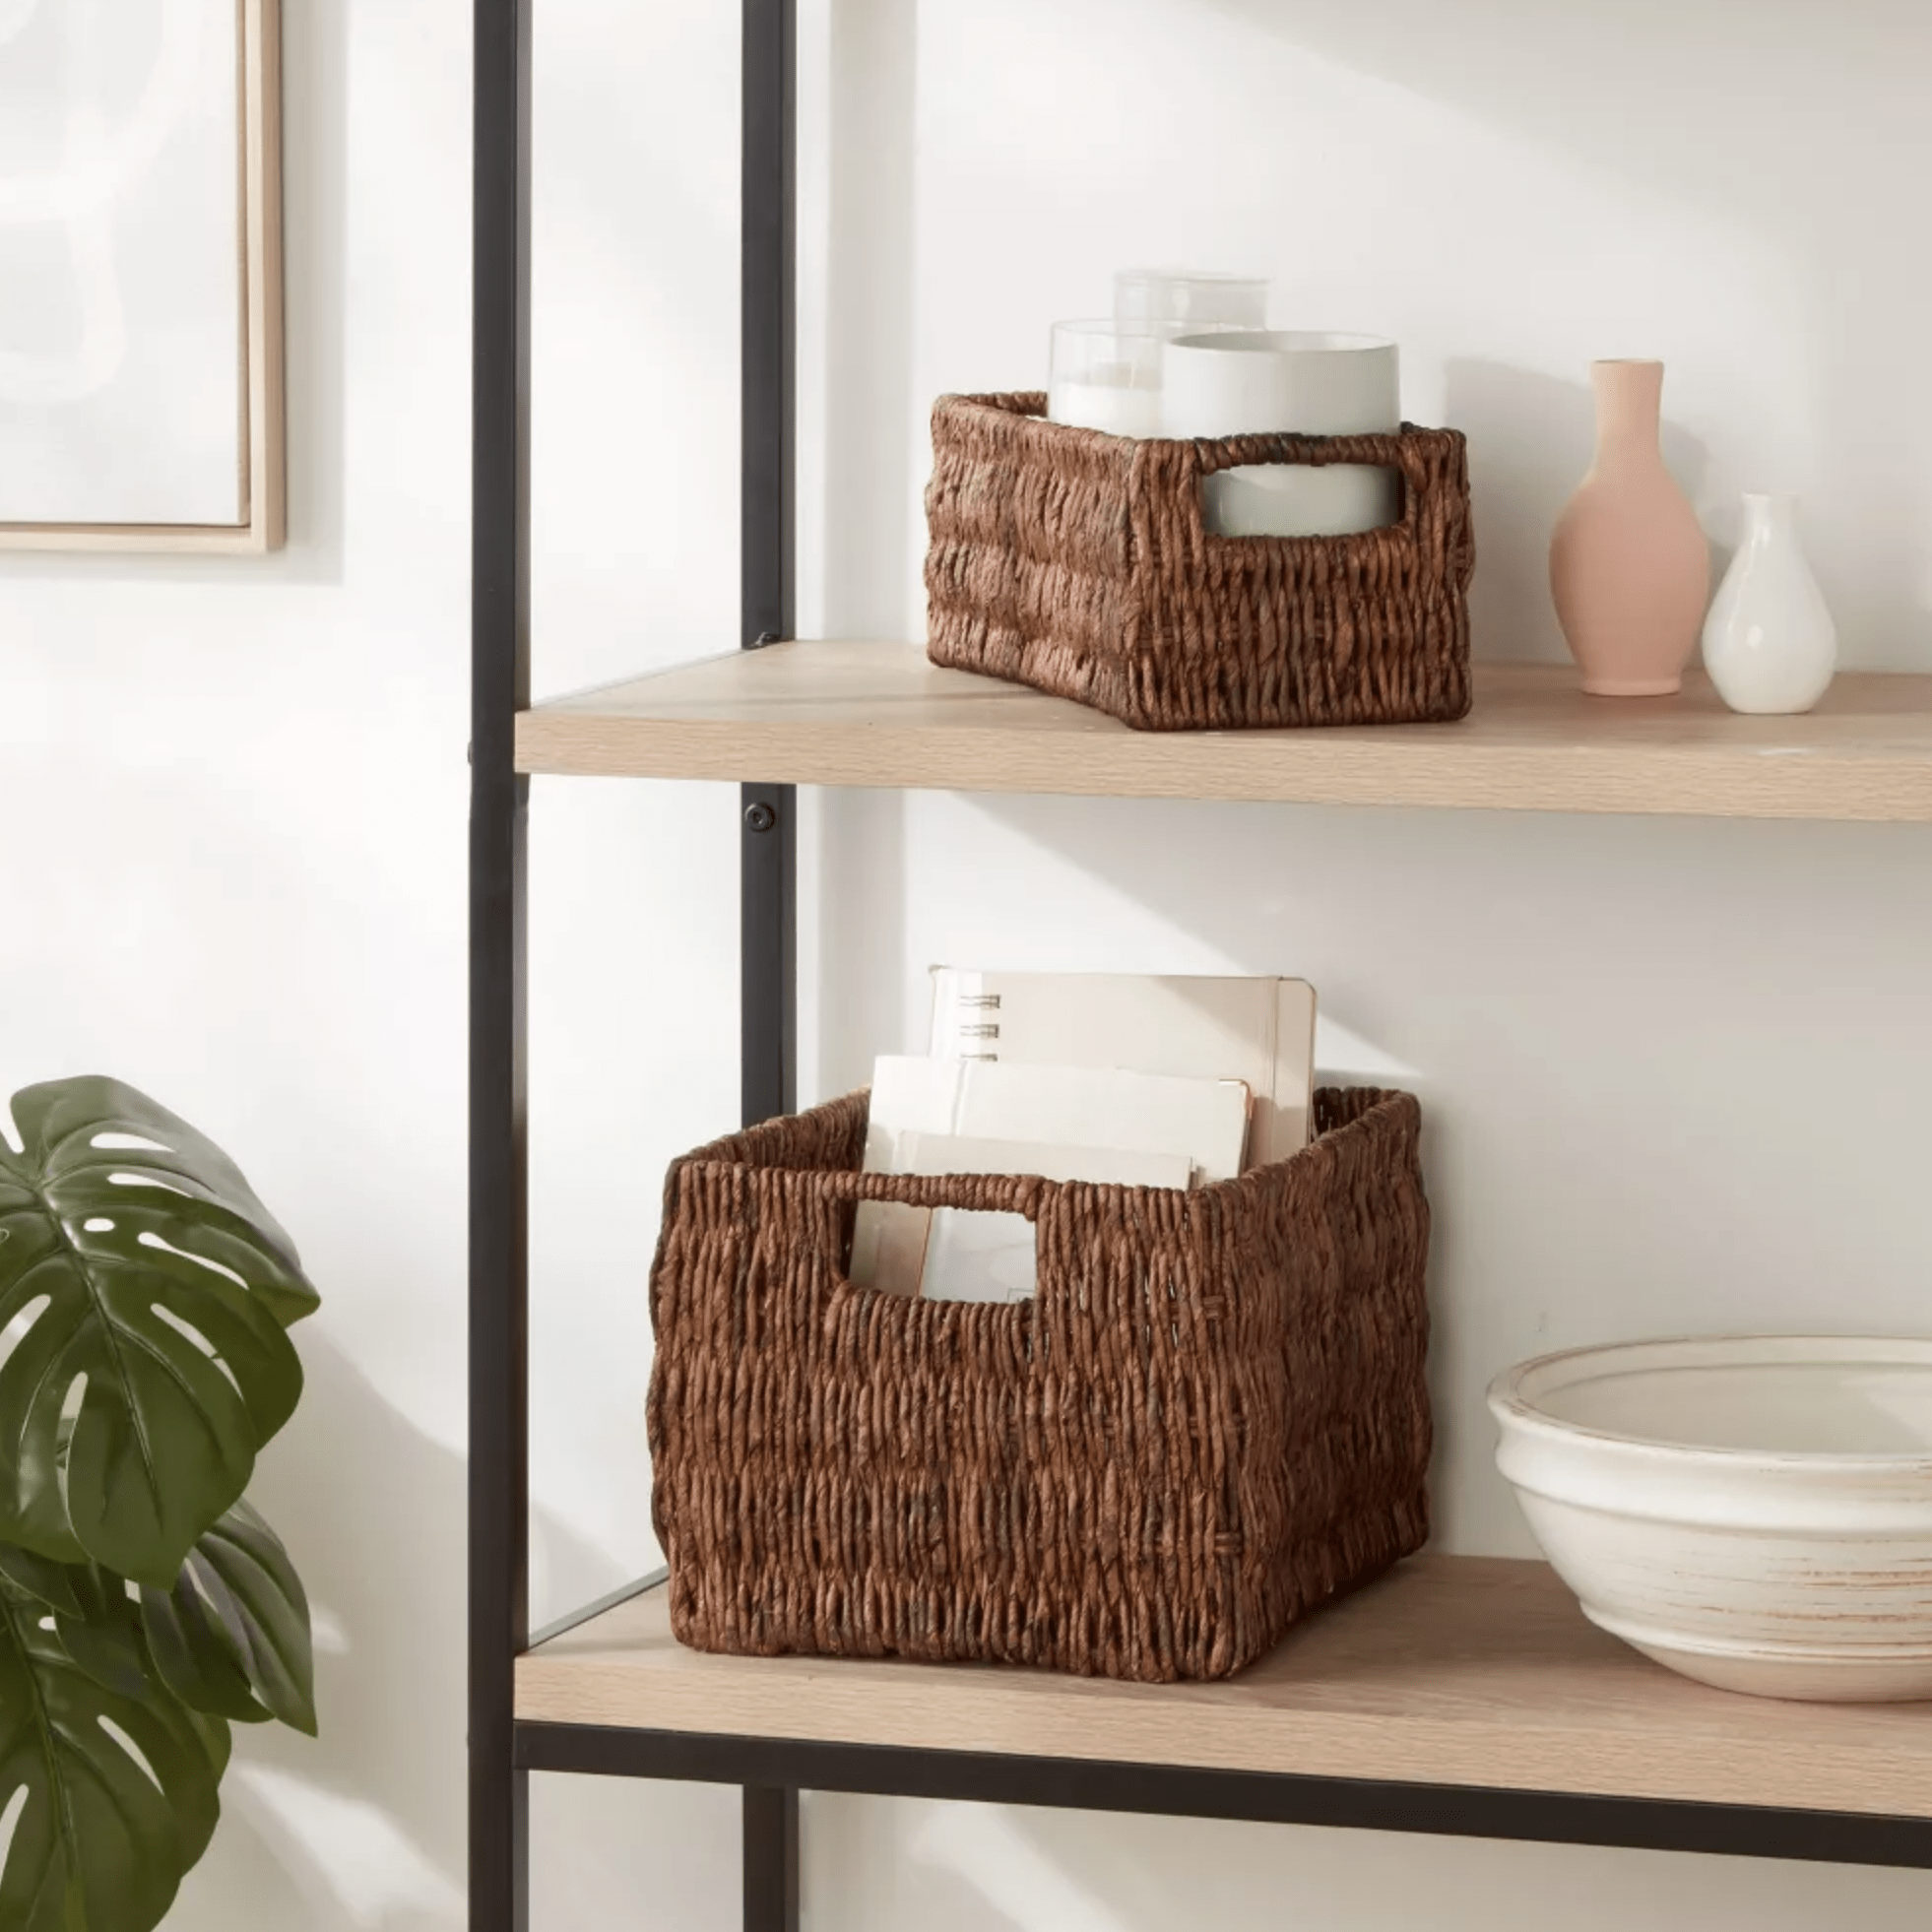 15 Items to Add to Your Housewarming Registry 